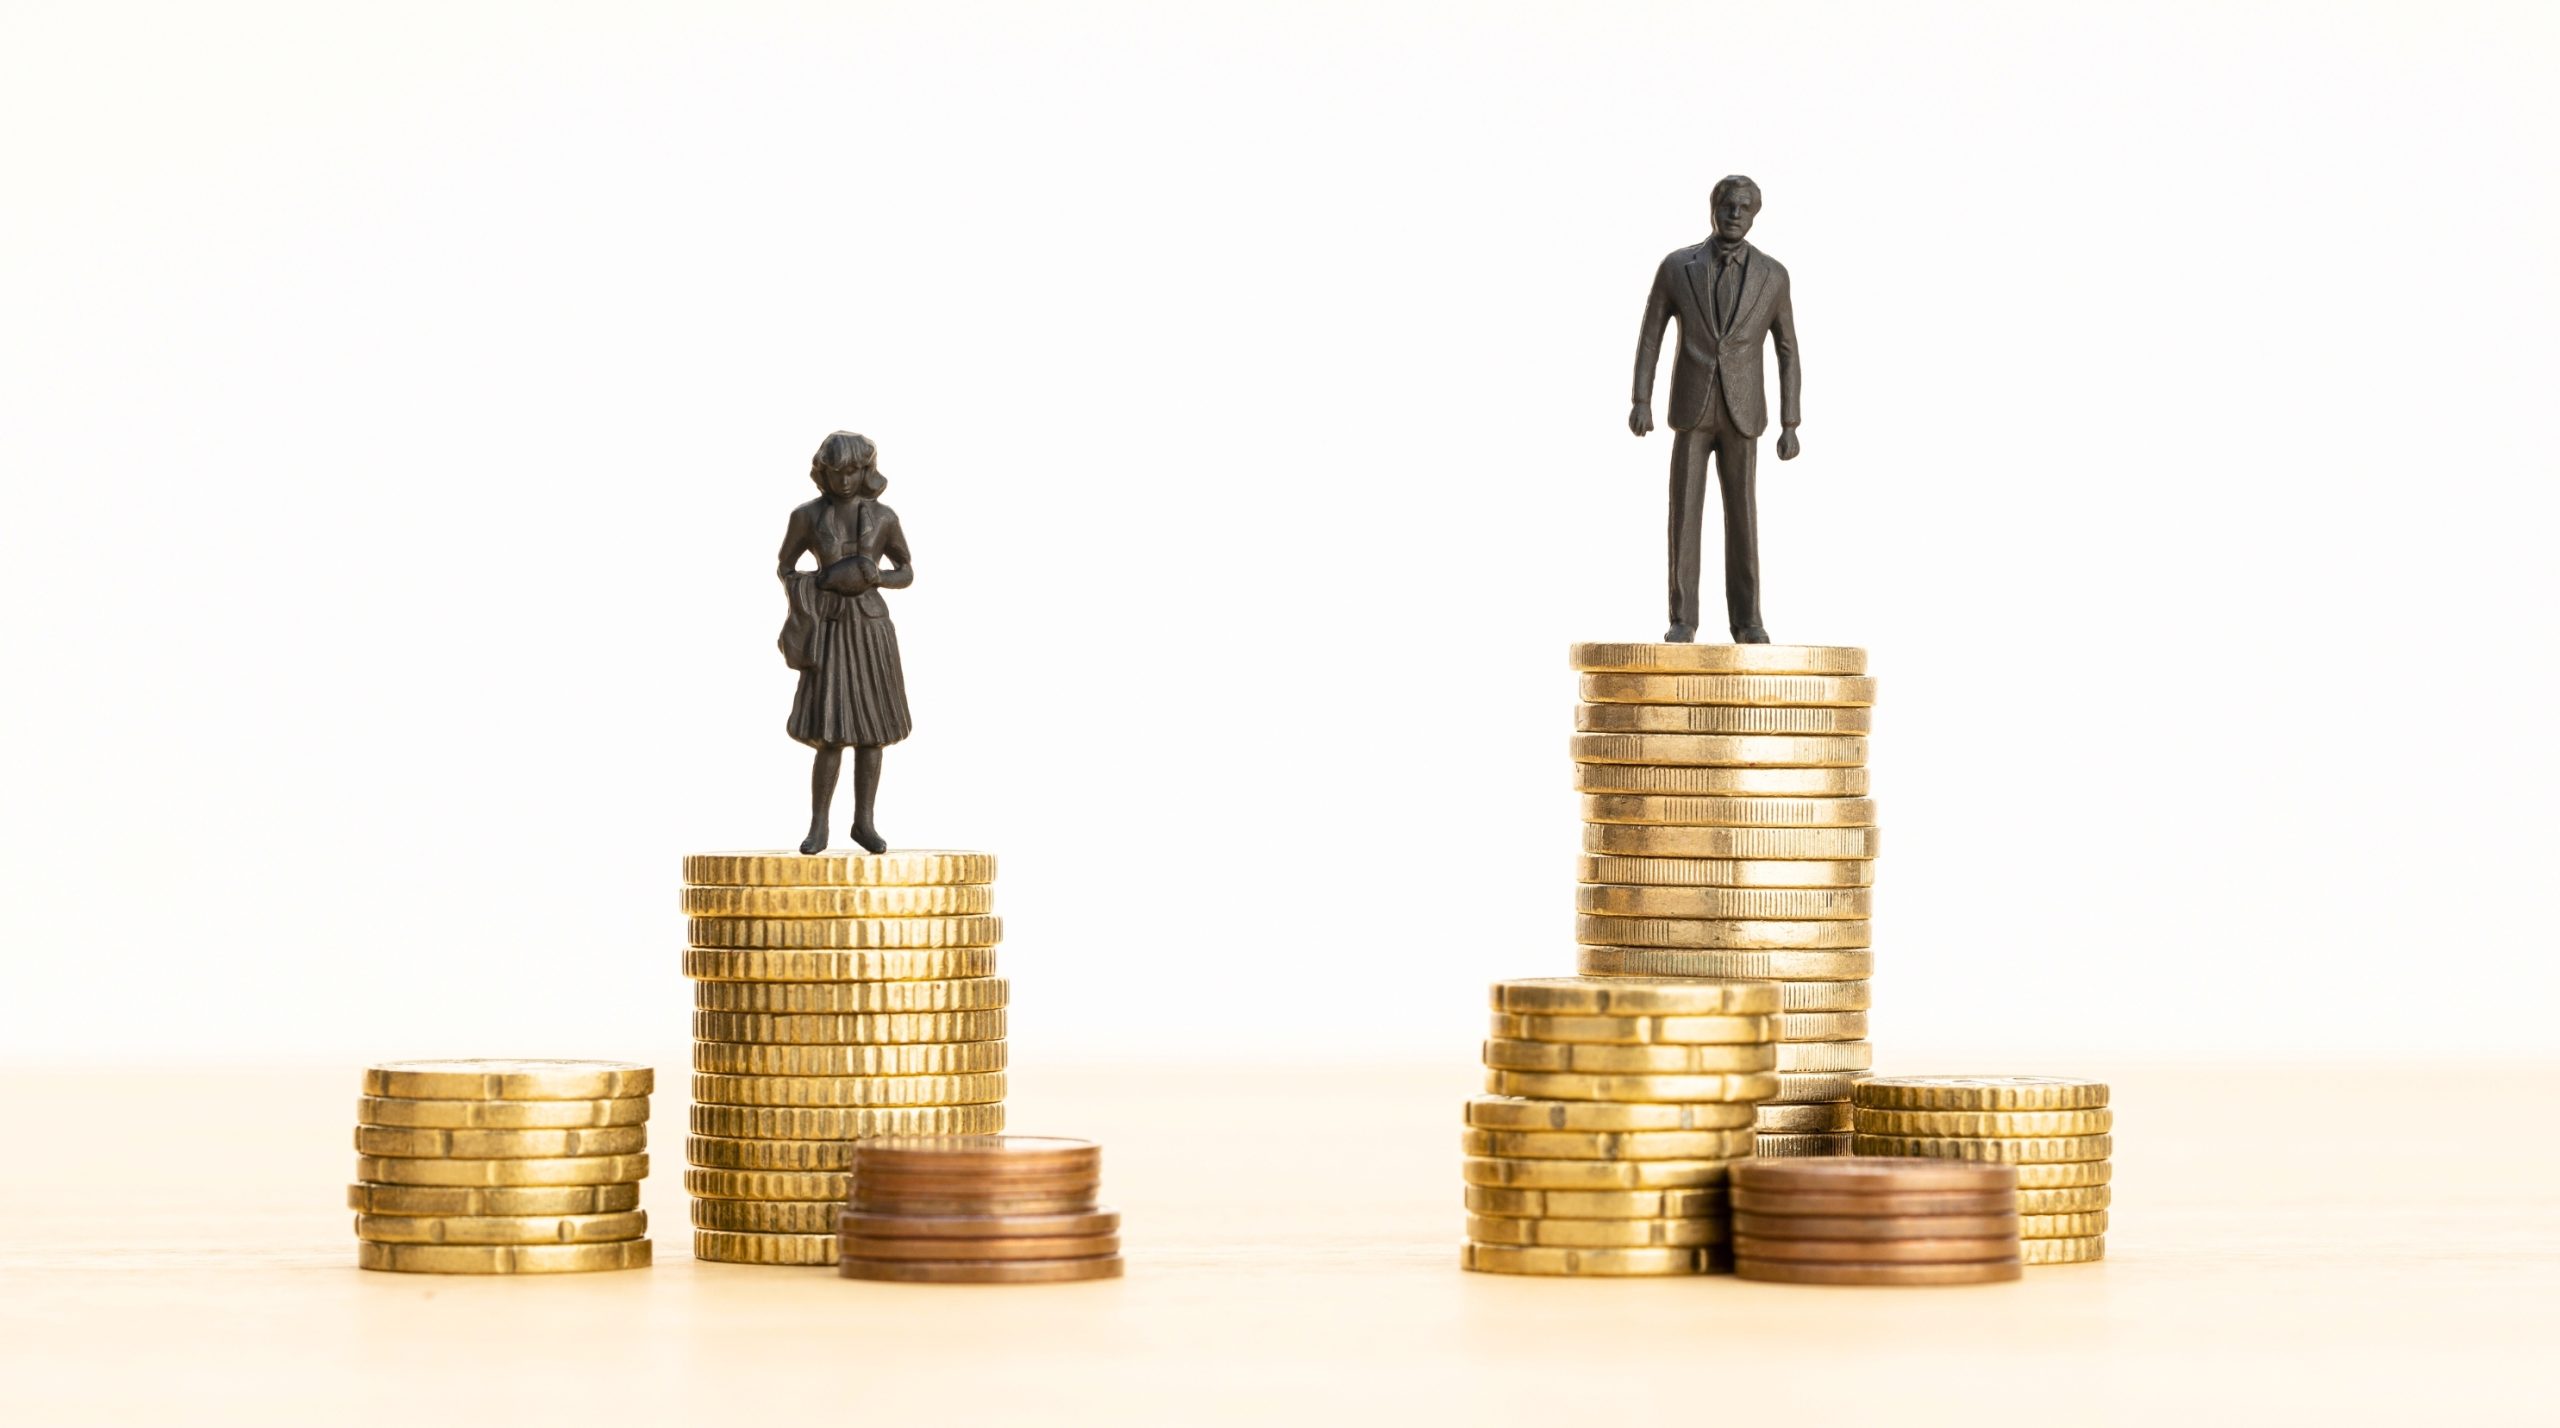 Debunking Myths: The Gender Pay Gap Goes Beyond Education and Experience